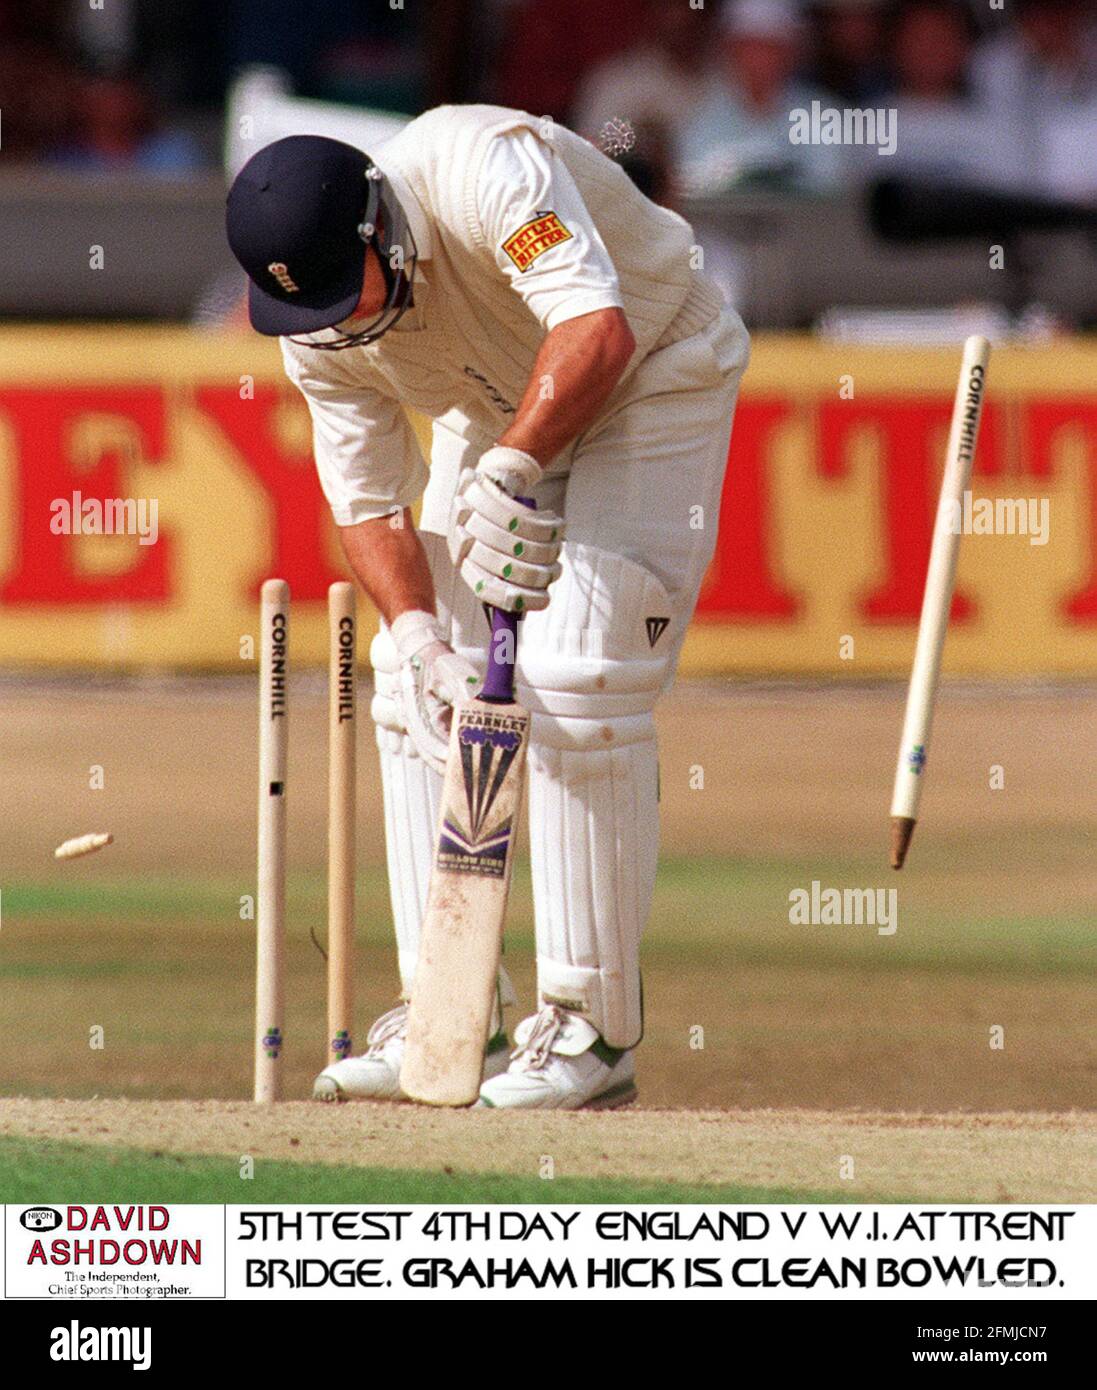 Graeme Hick is clean bowled by Benjamin  during the 5th test match at Trent Bridge between England and  West Indies Stock Photo